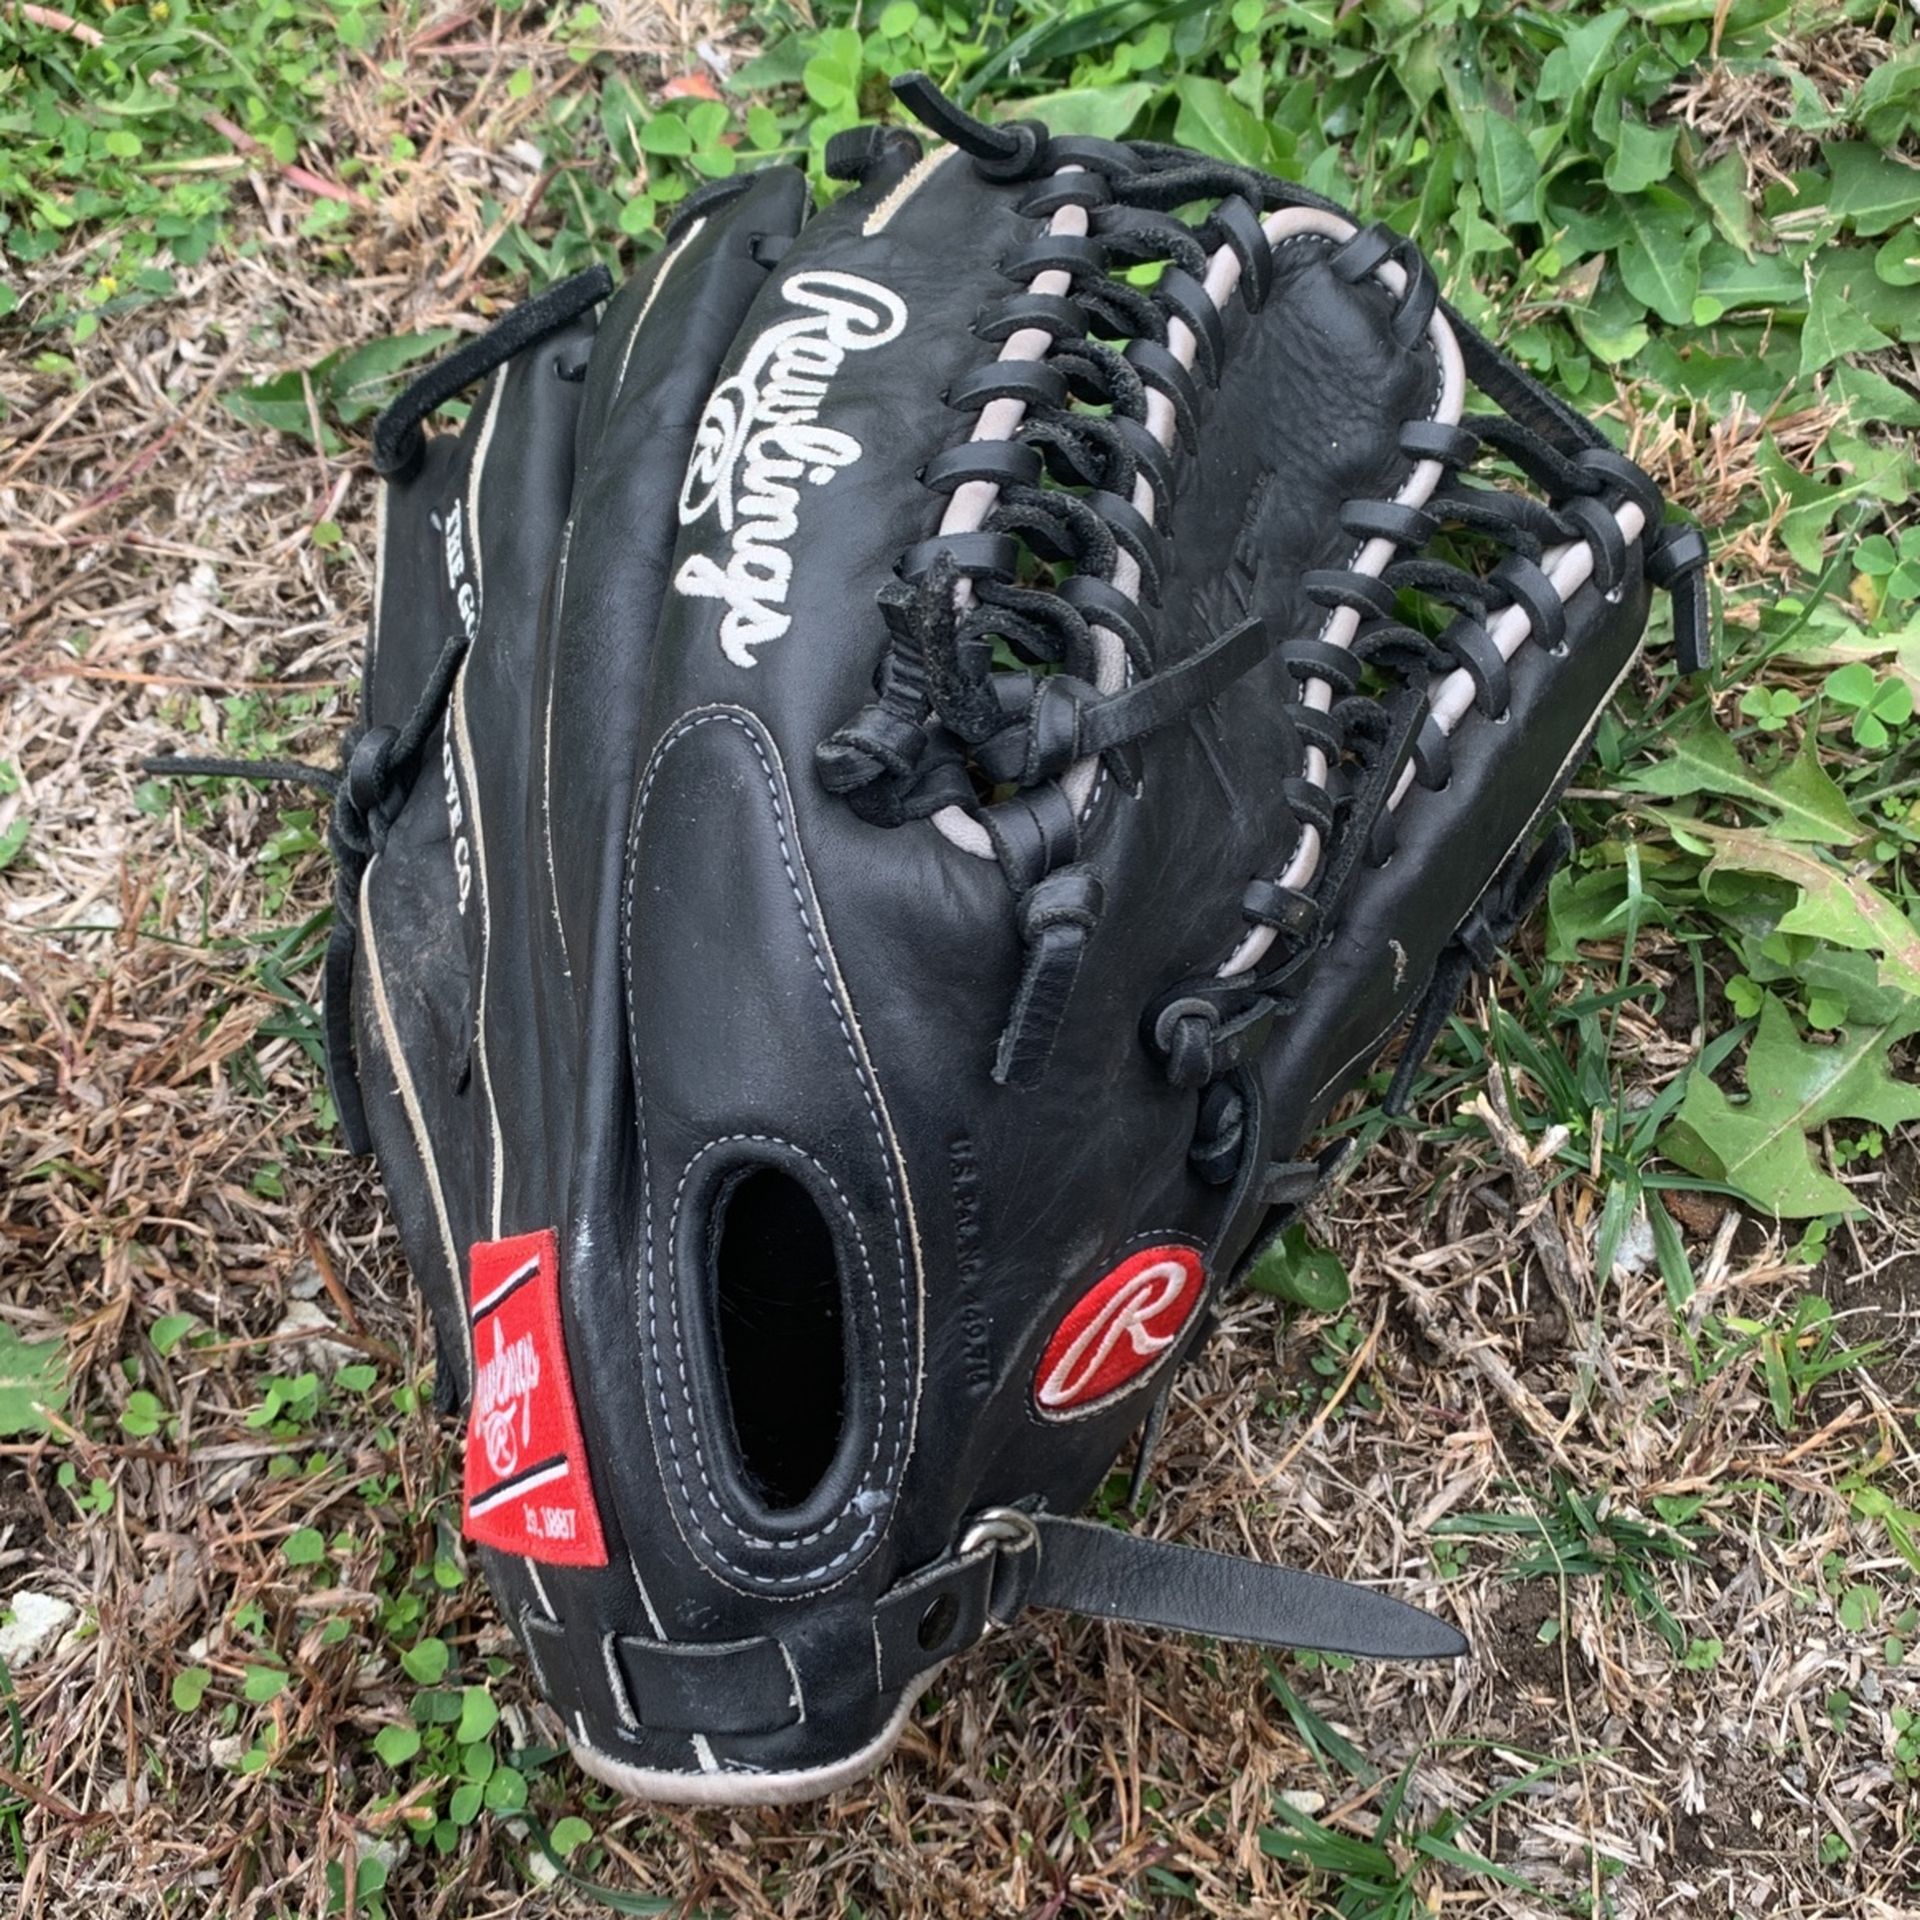 Rawlings heart of the hide